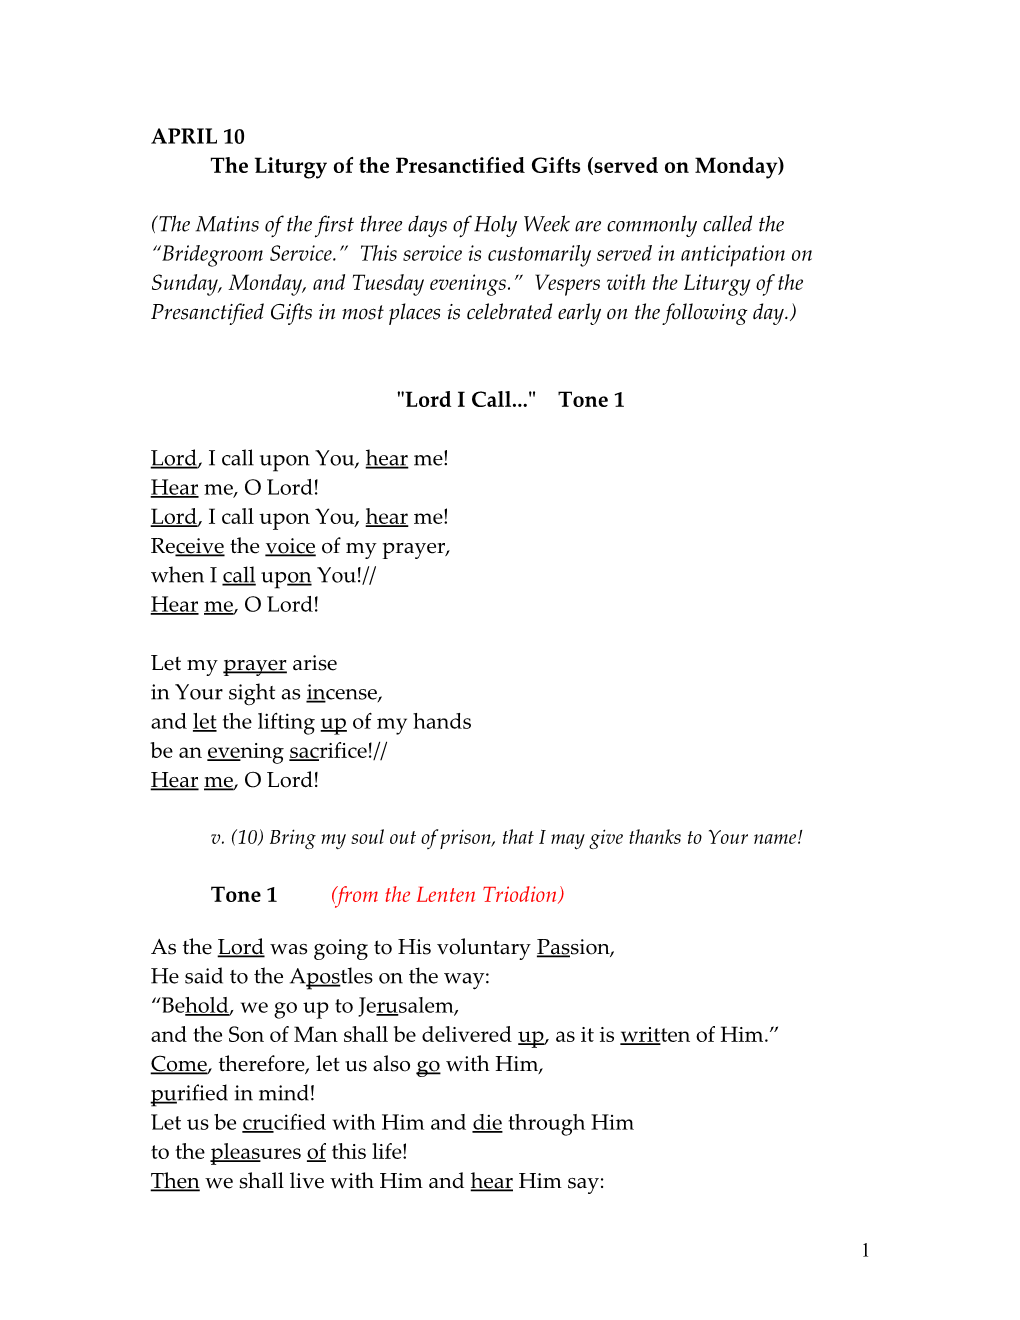 The Liturgy of the Presanctified Gifts (Served on Monday)